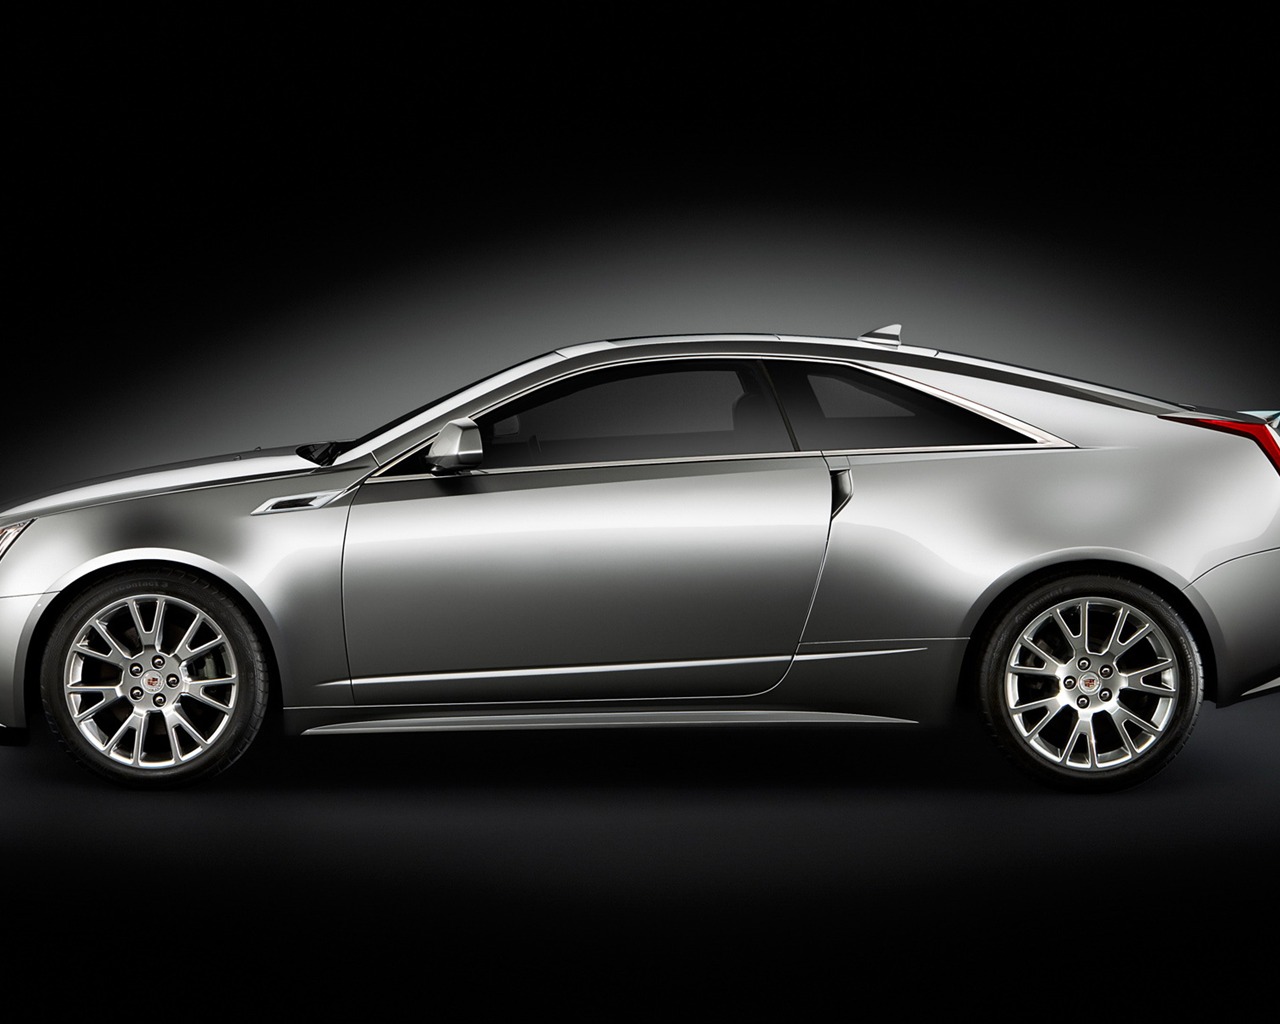 Cadillac CTS Coupe - 2011 凱迪拉克 #5 - 1280x1024